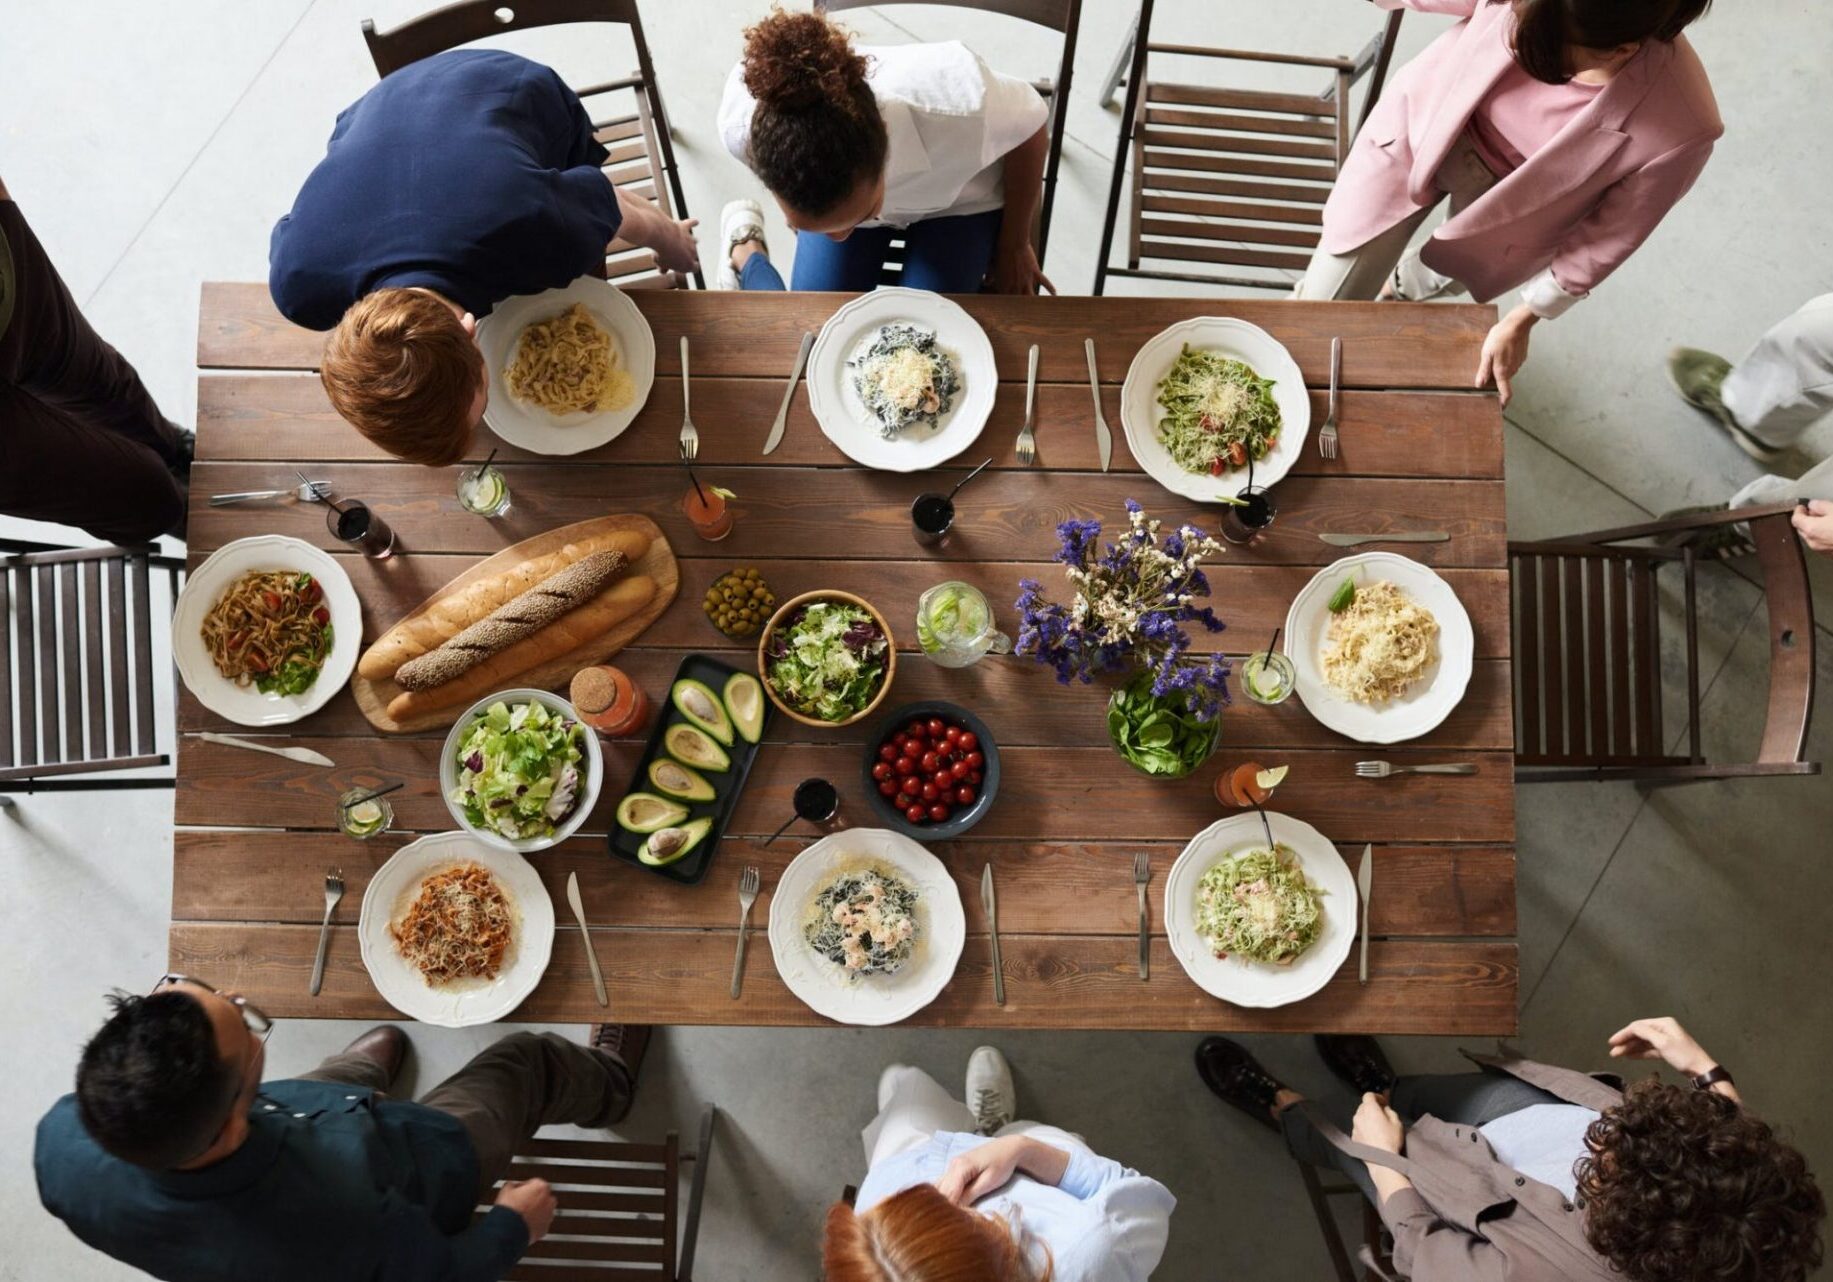 A group of people sitting around a table with food.